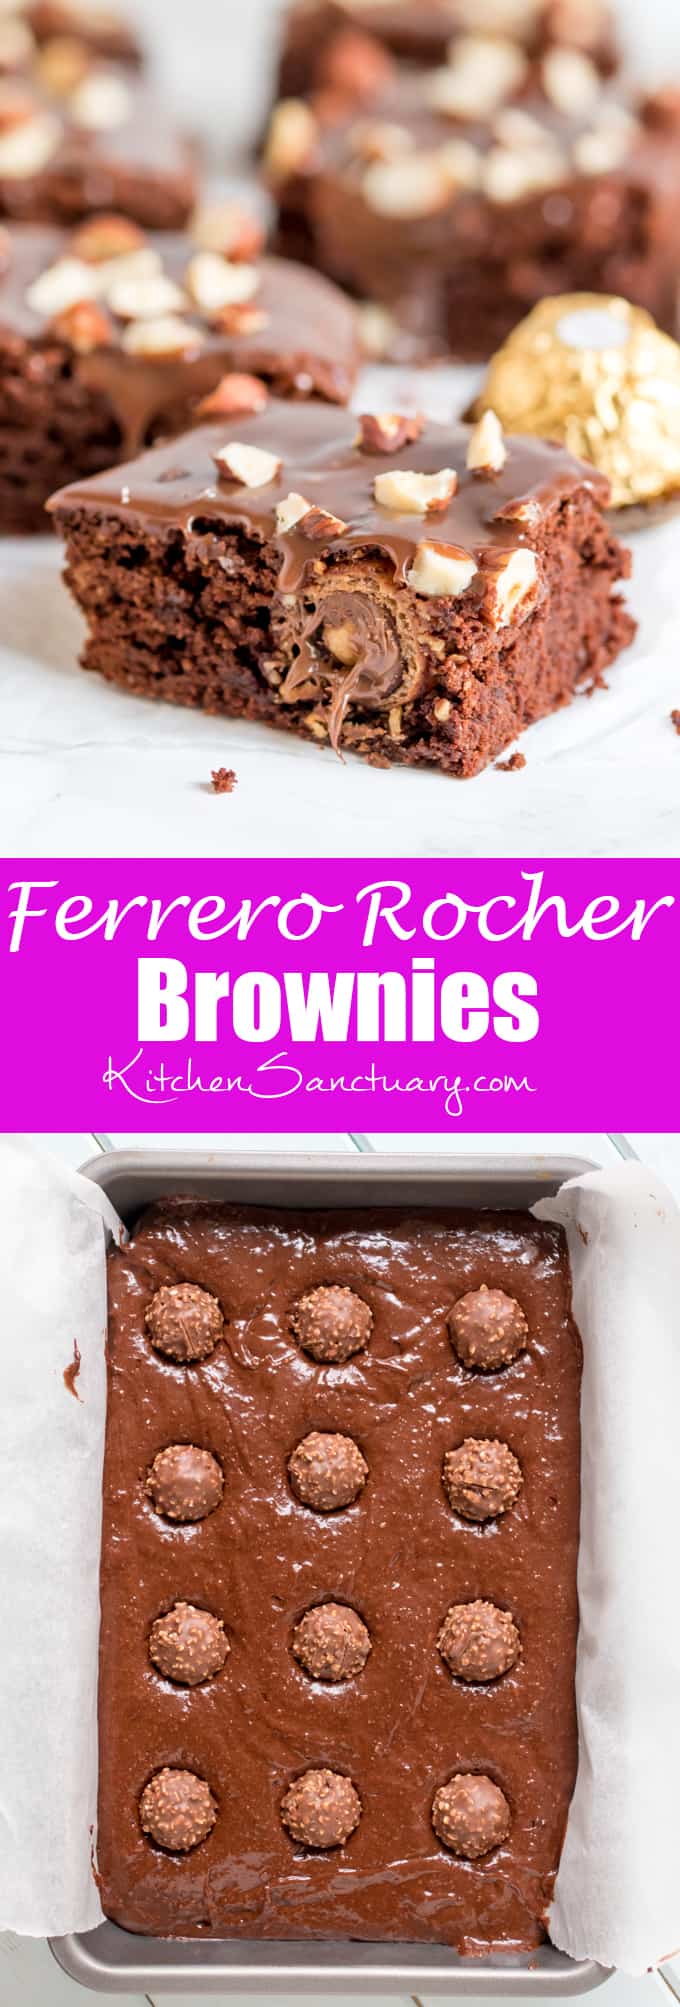 These Ferrero Rocher Brownies are the ultimate treat to go with your afternoon cup of coffee!